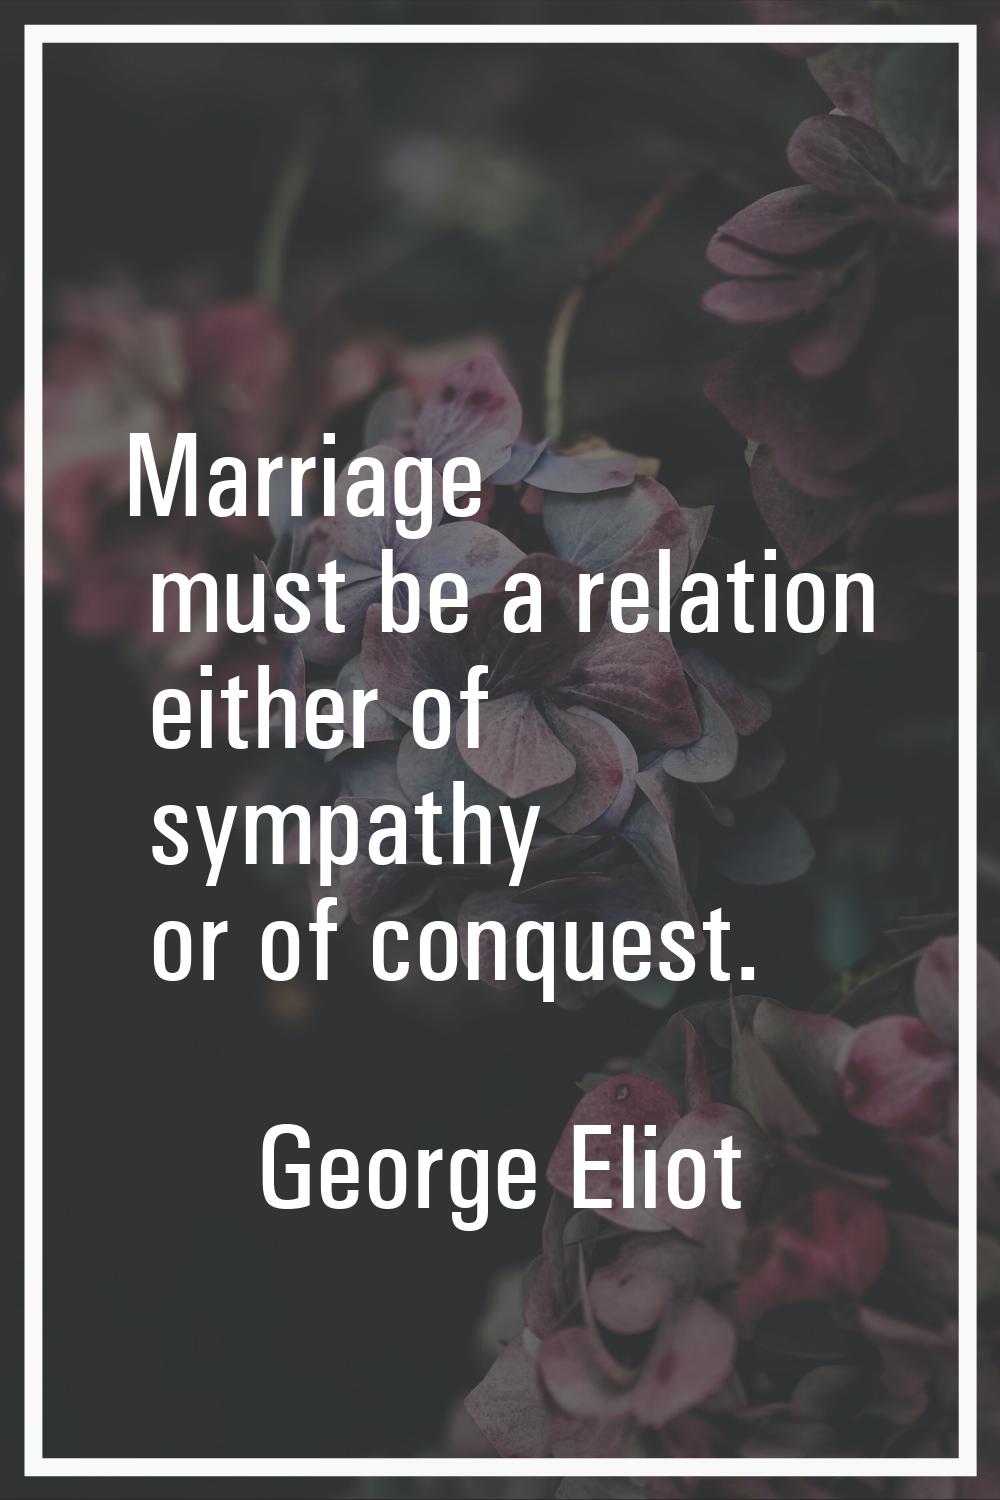 Marriage must be a relation either of sympathy or of conquest.